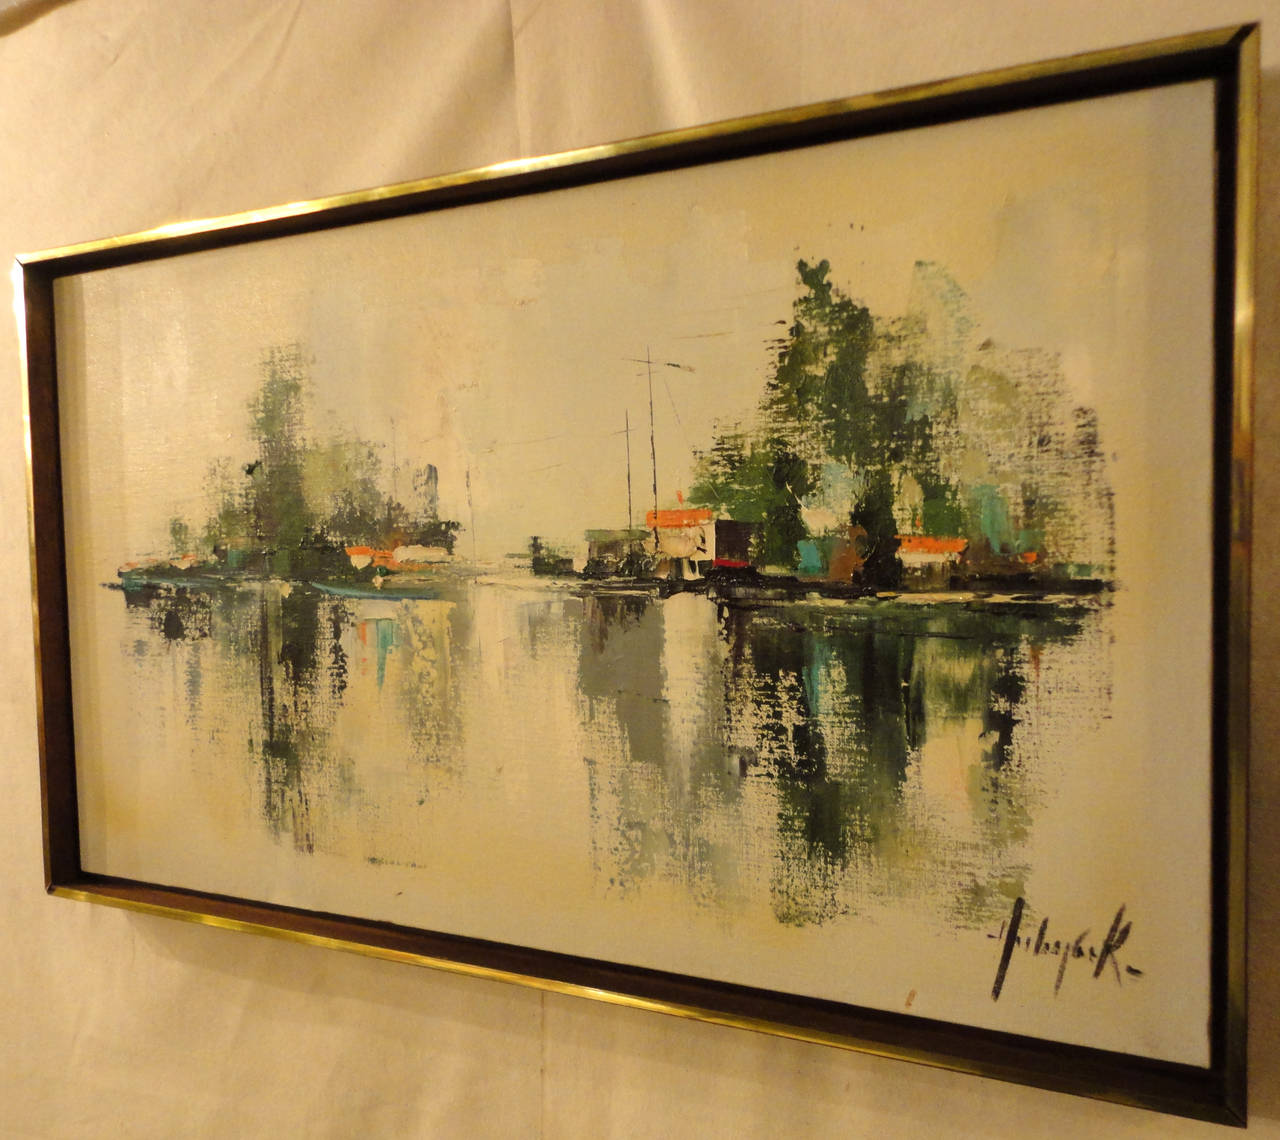 Beautiful depiction of boats on water.
Brass framed signed artwork.

(Please confirm item location - NY or NJ - with dealer)